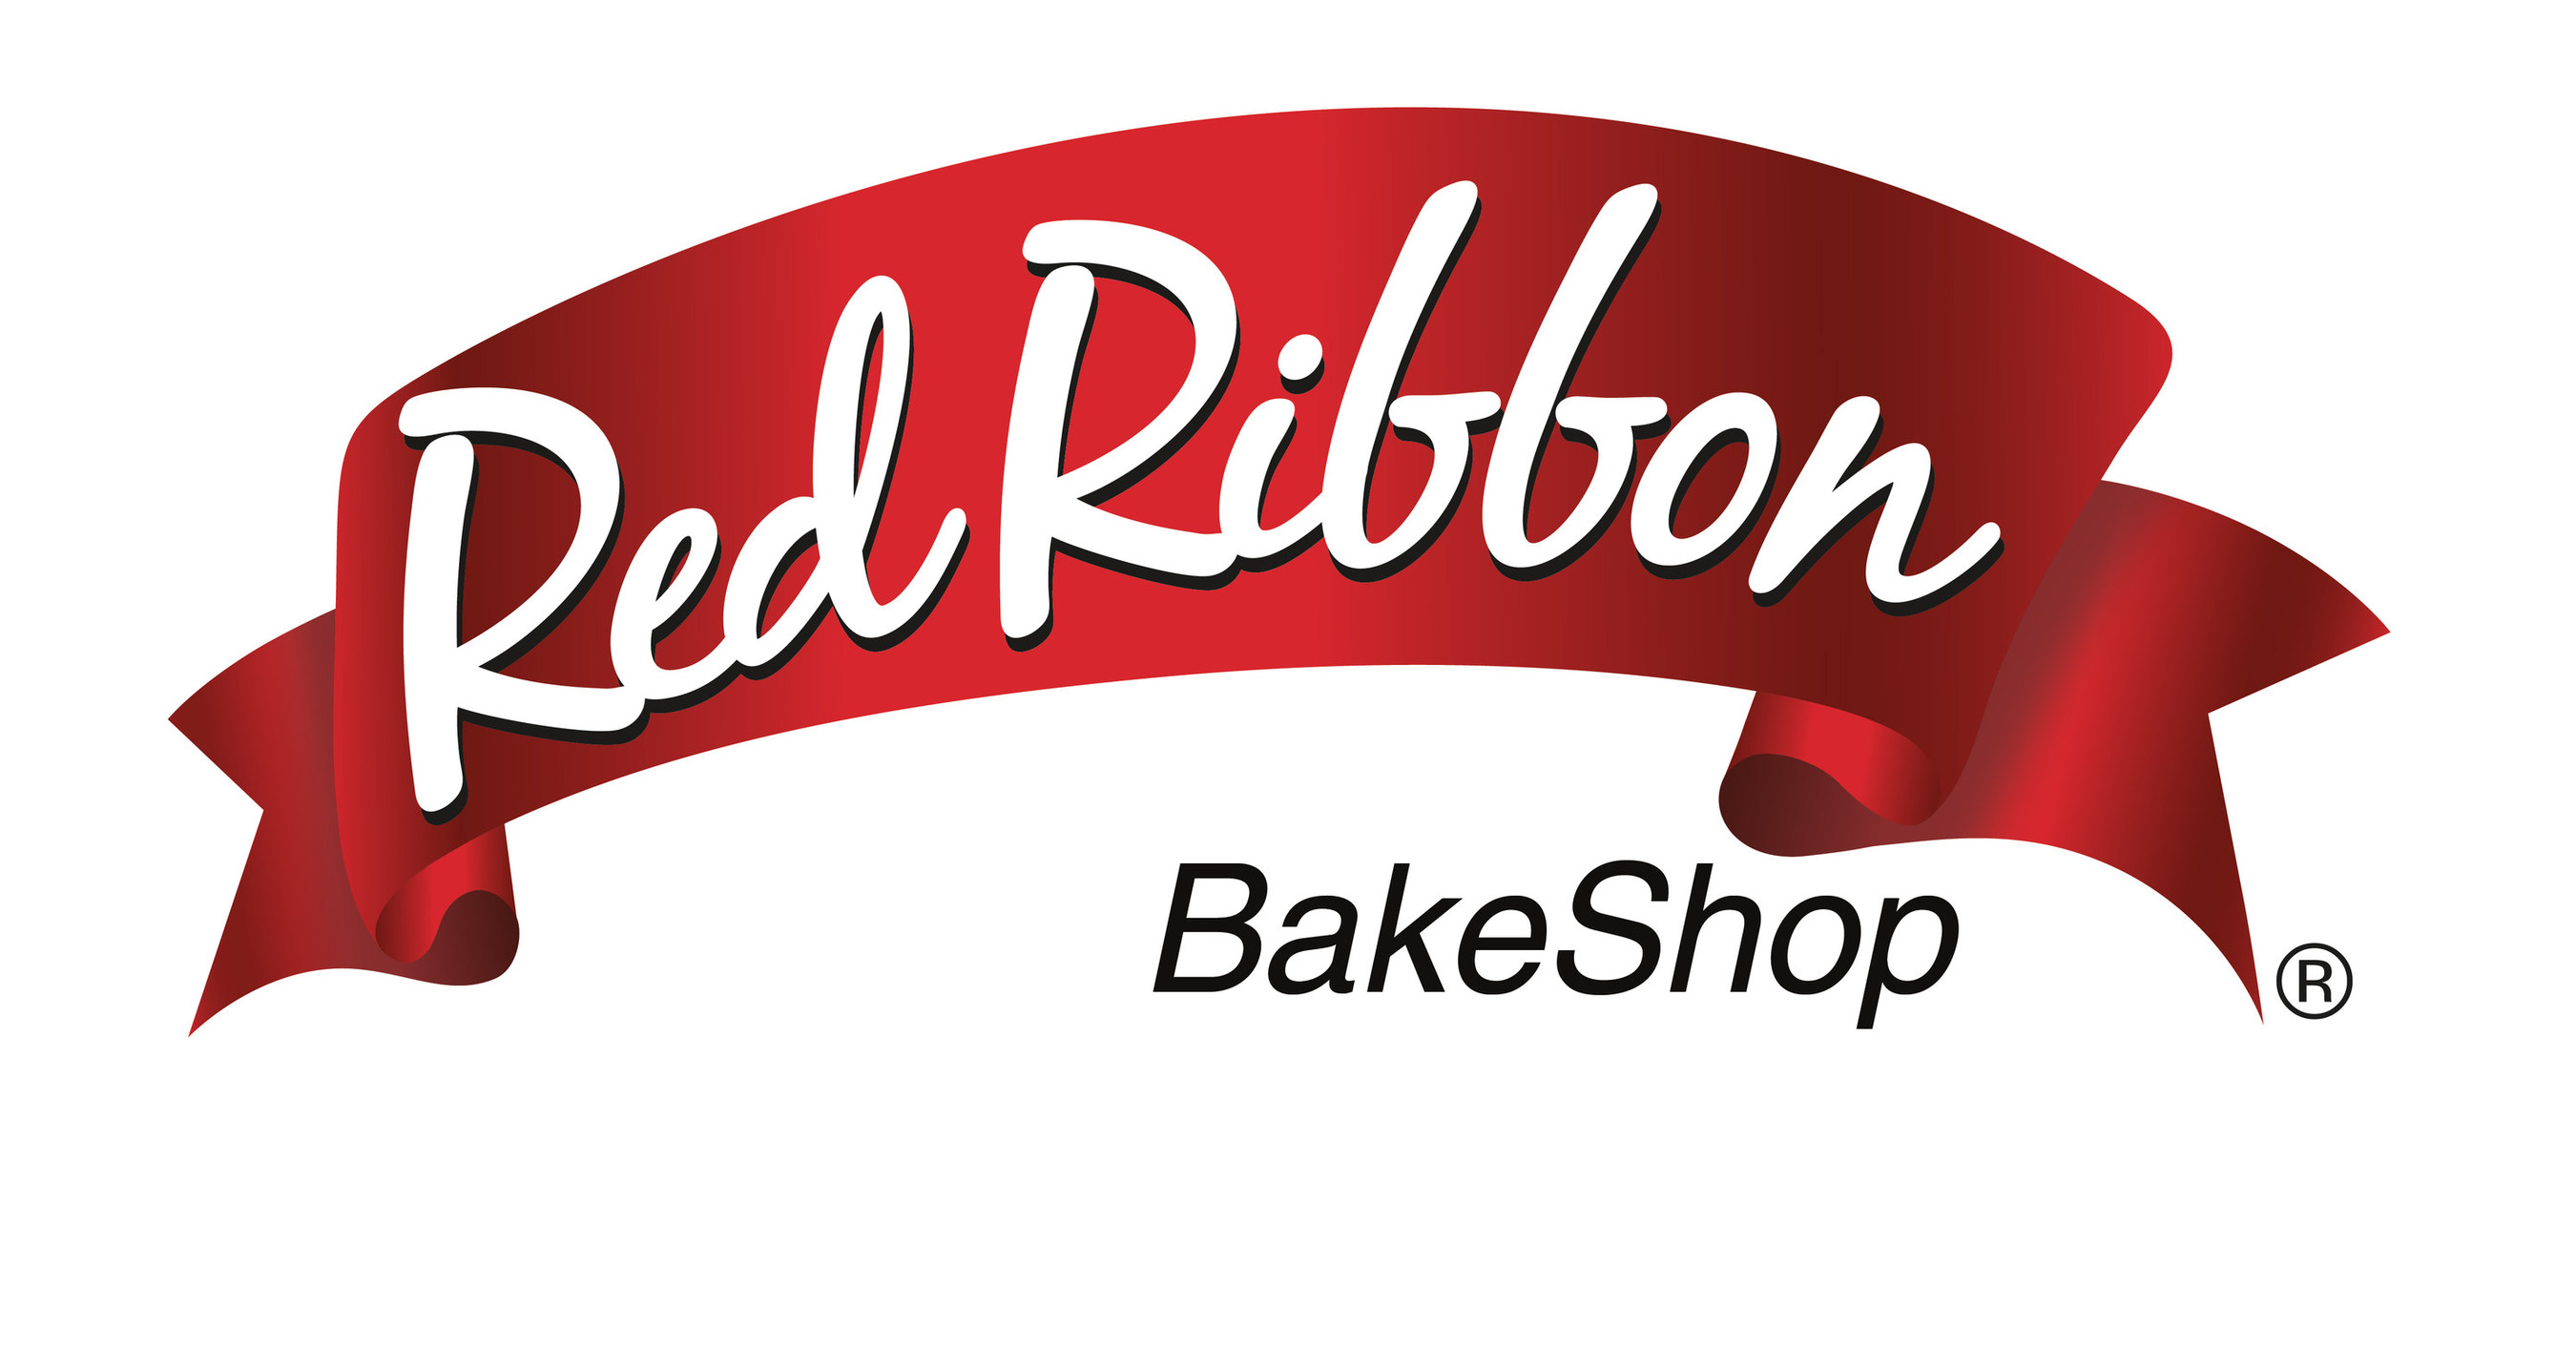 Red Ribbon Bakeshop Opens Its First Location in San Antonio, Texas